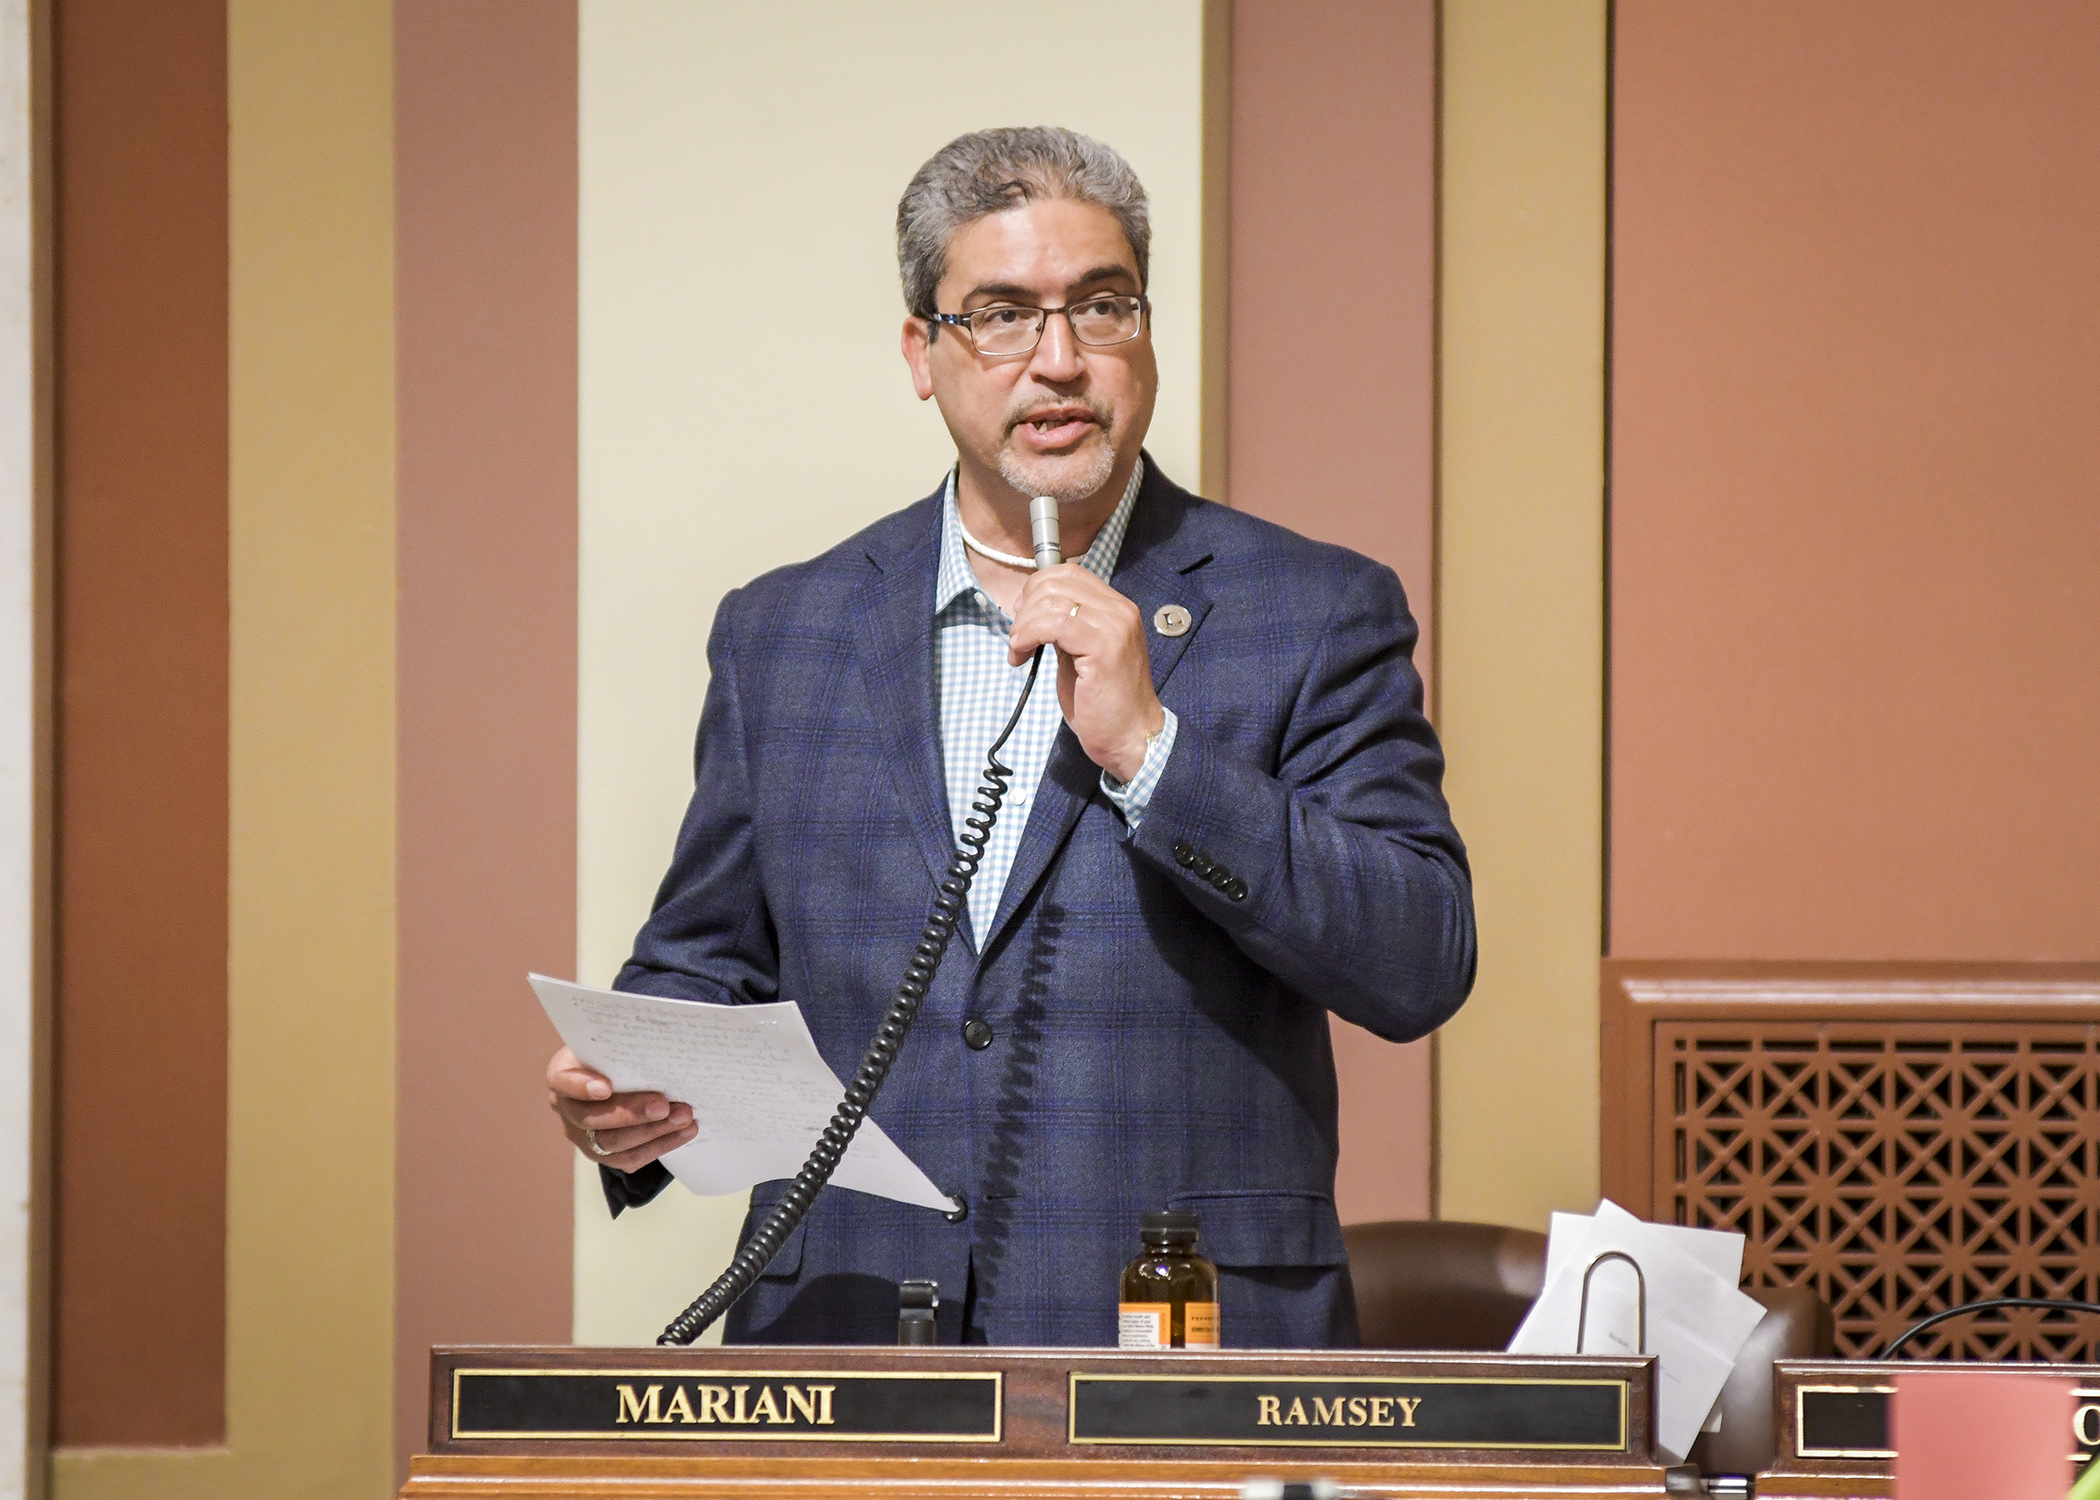 Rep. Carlos Mariani, chair of the House Public Safety and Criminal Justice Reform Finance and Policy Division, presents the omnibus public safety finance bill on the House Floor April 29. Photo by Andrew VonBank